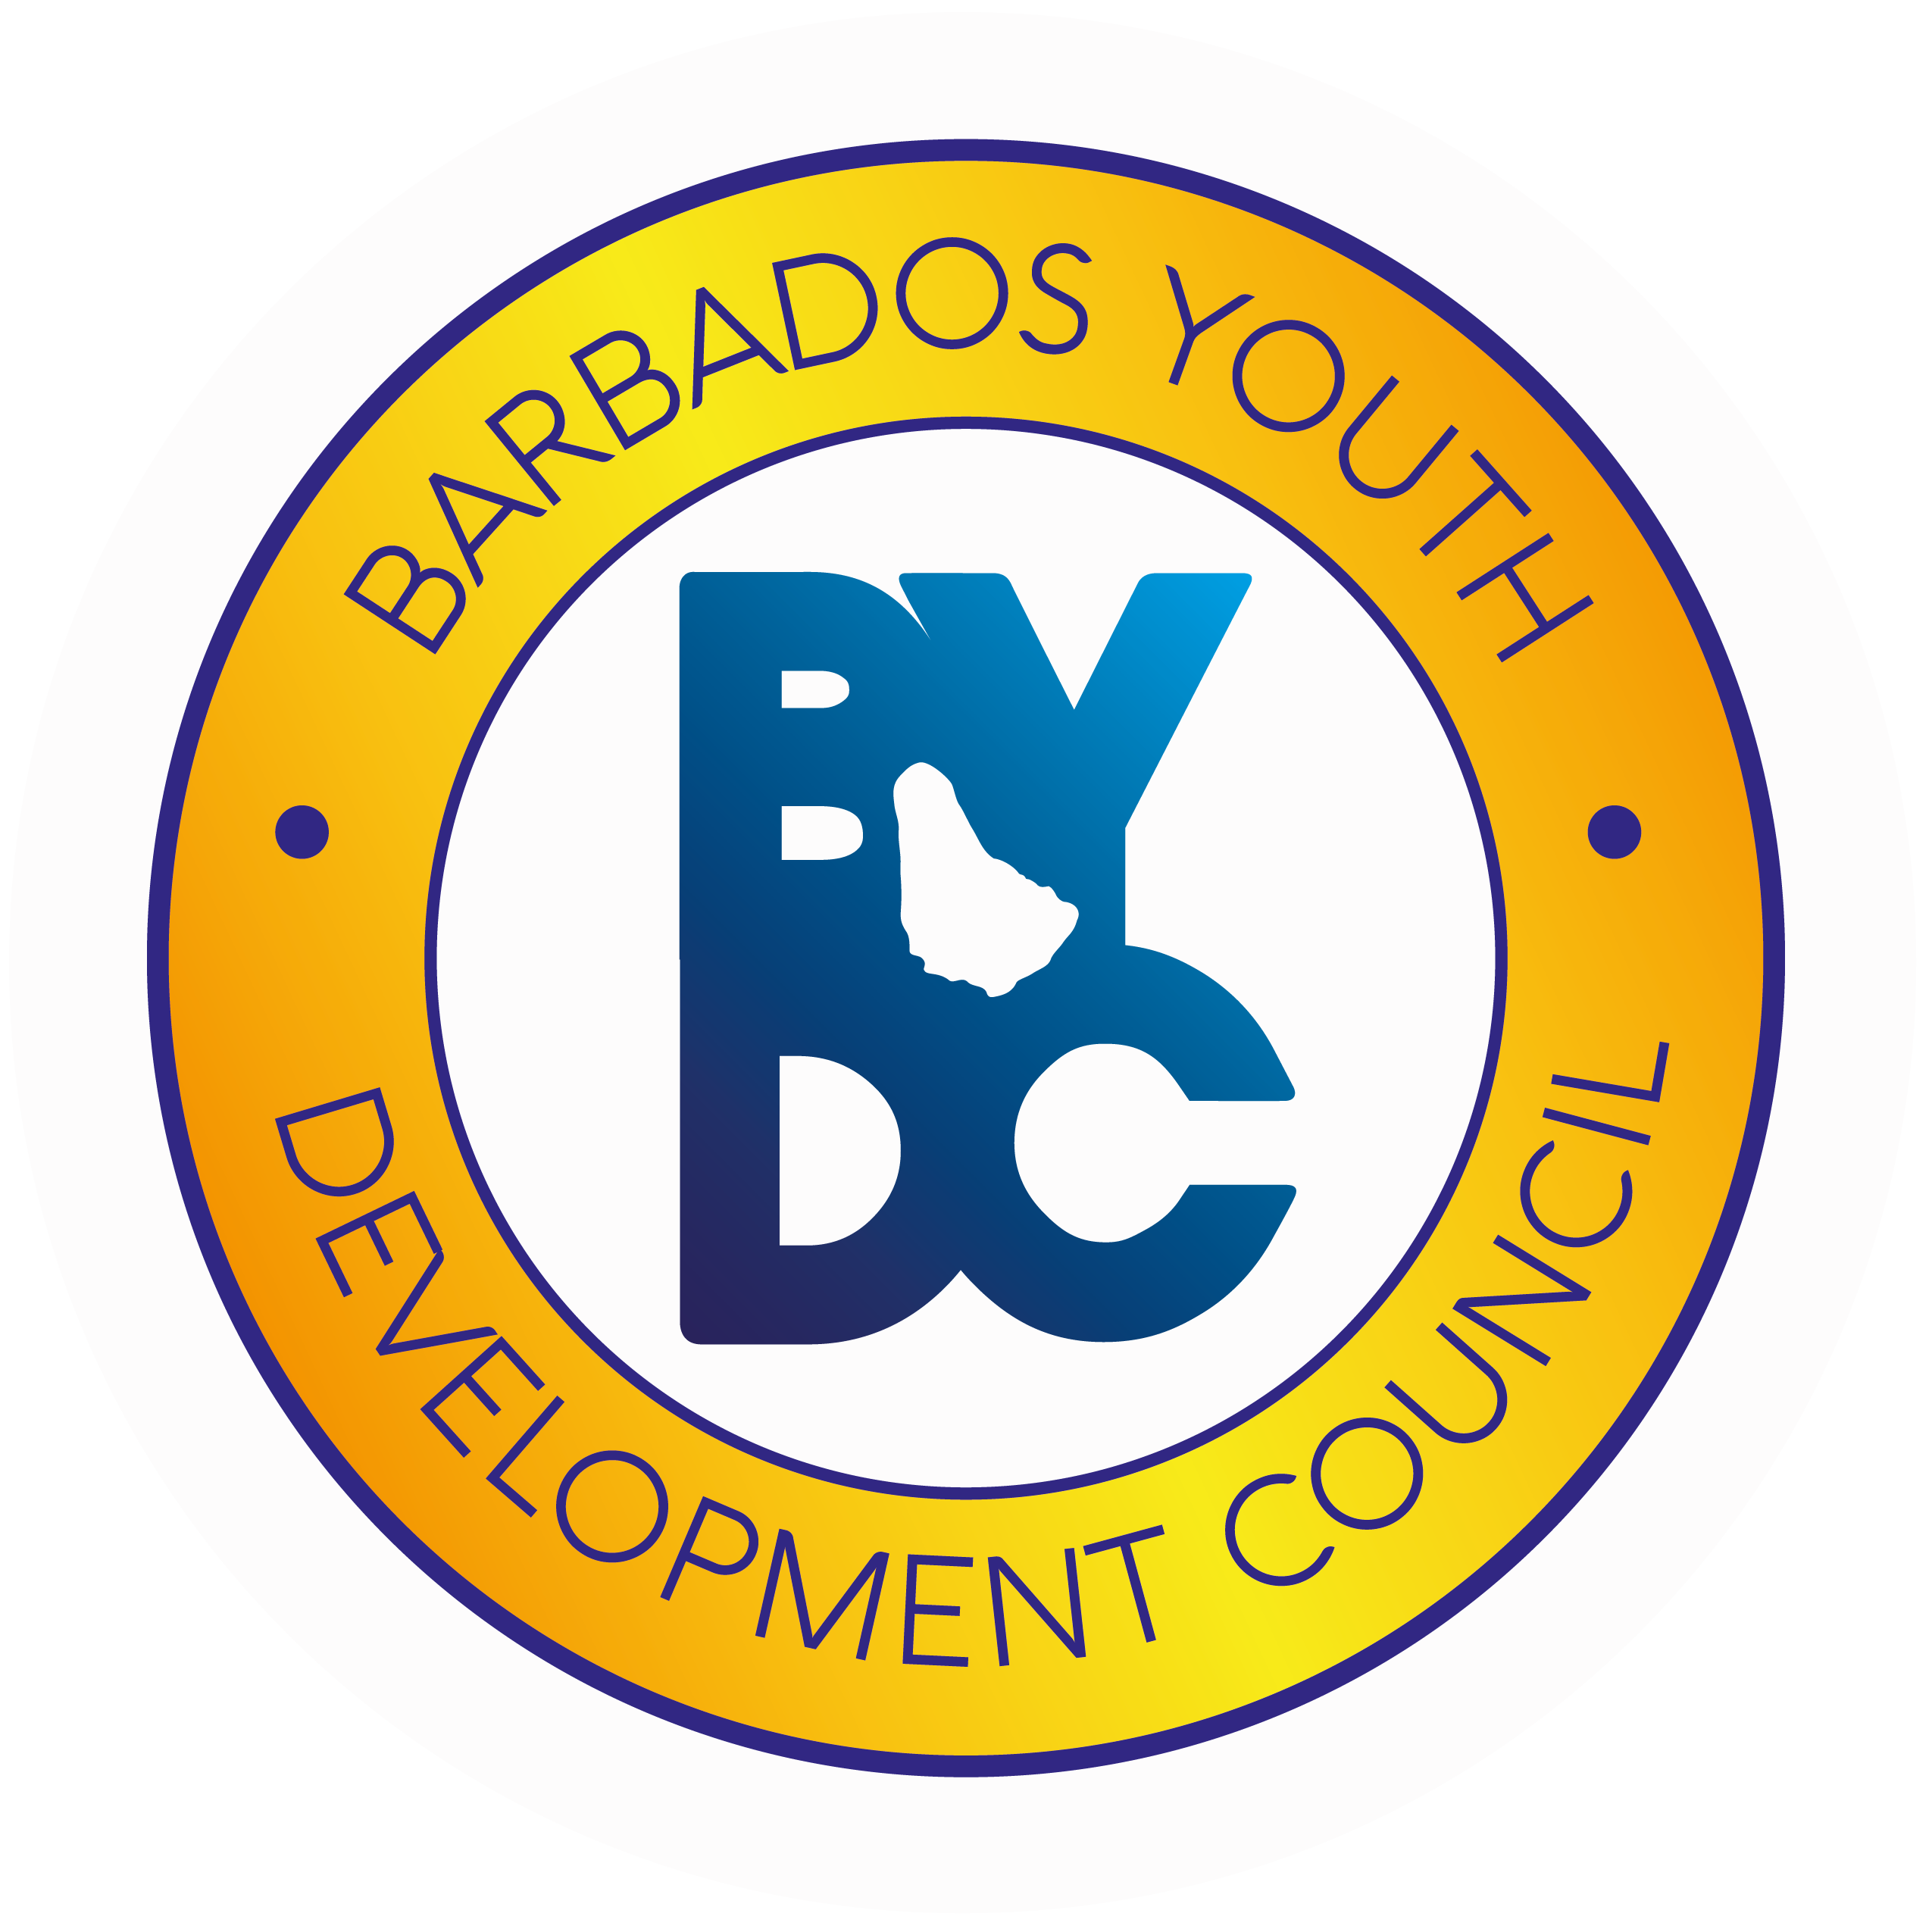 Barbados Youth Development Council